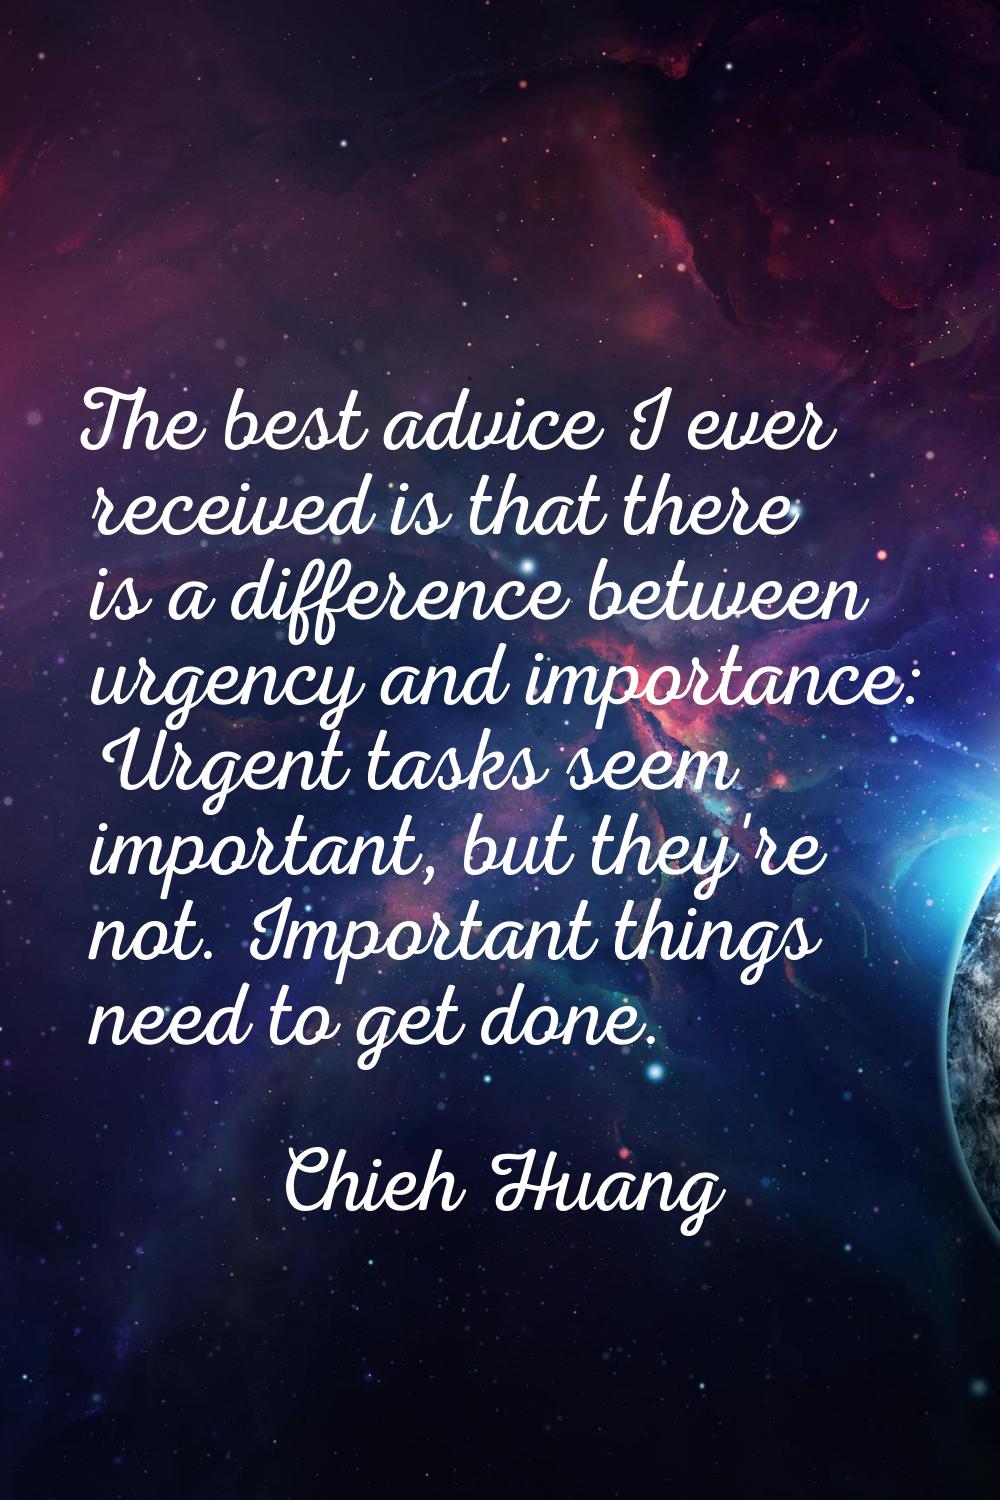 The best advice I ever received is that there is a difference between urgency and importance: Urgen